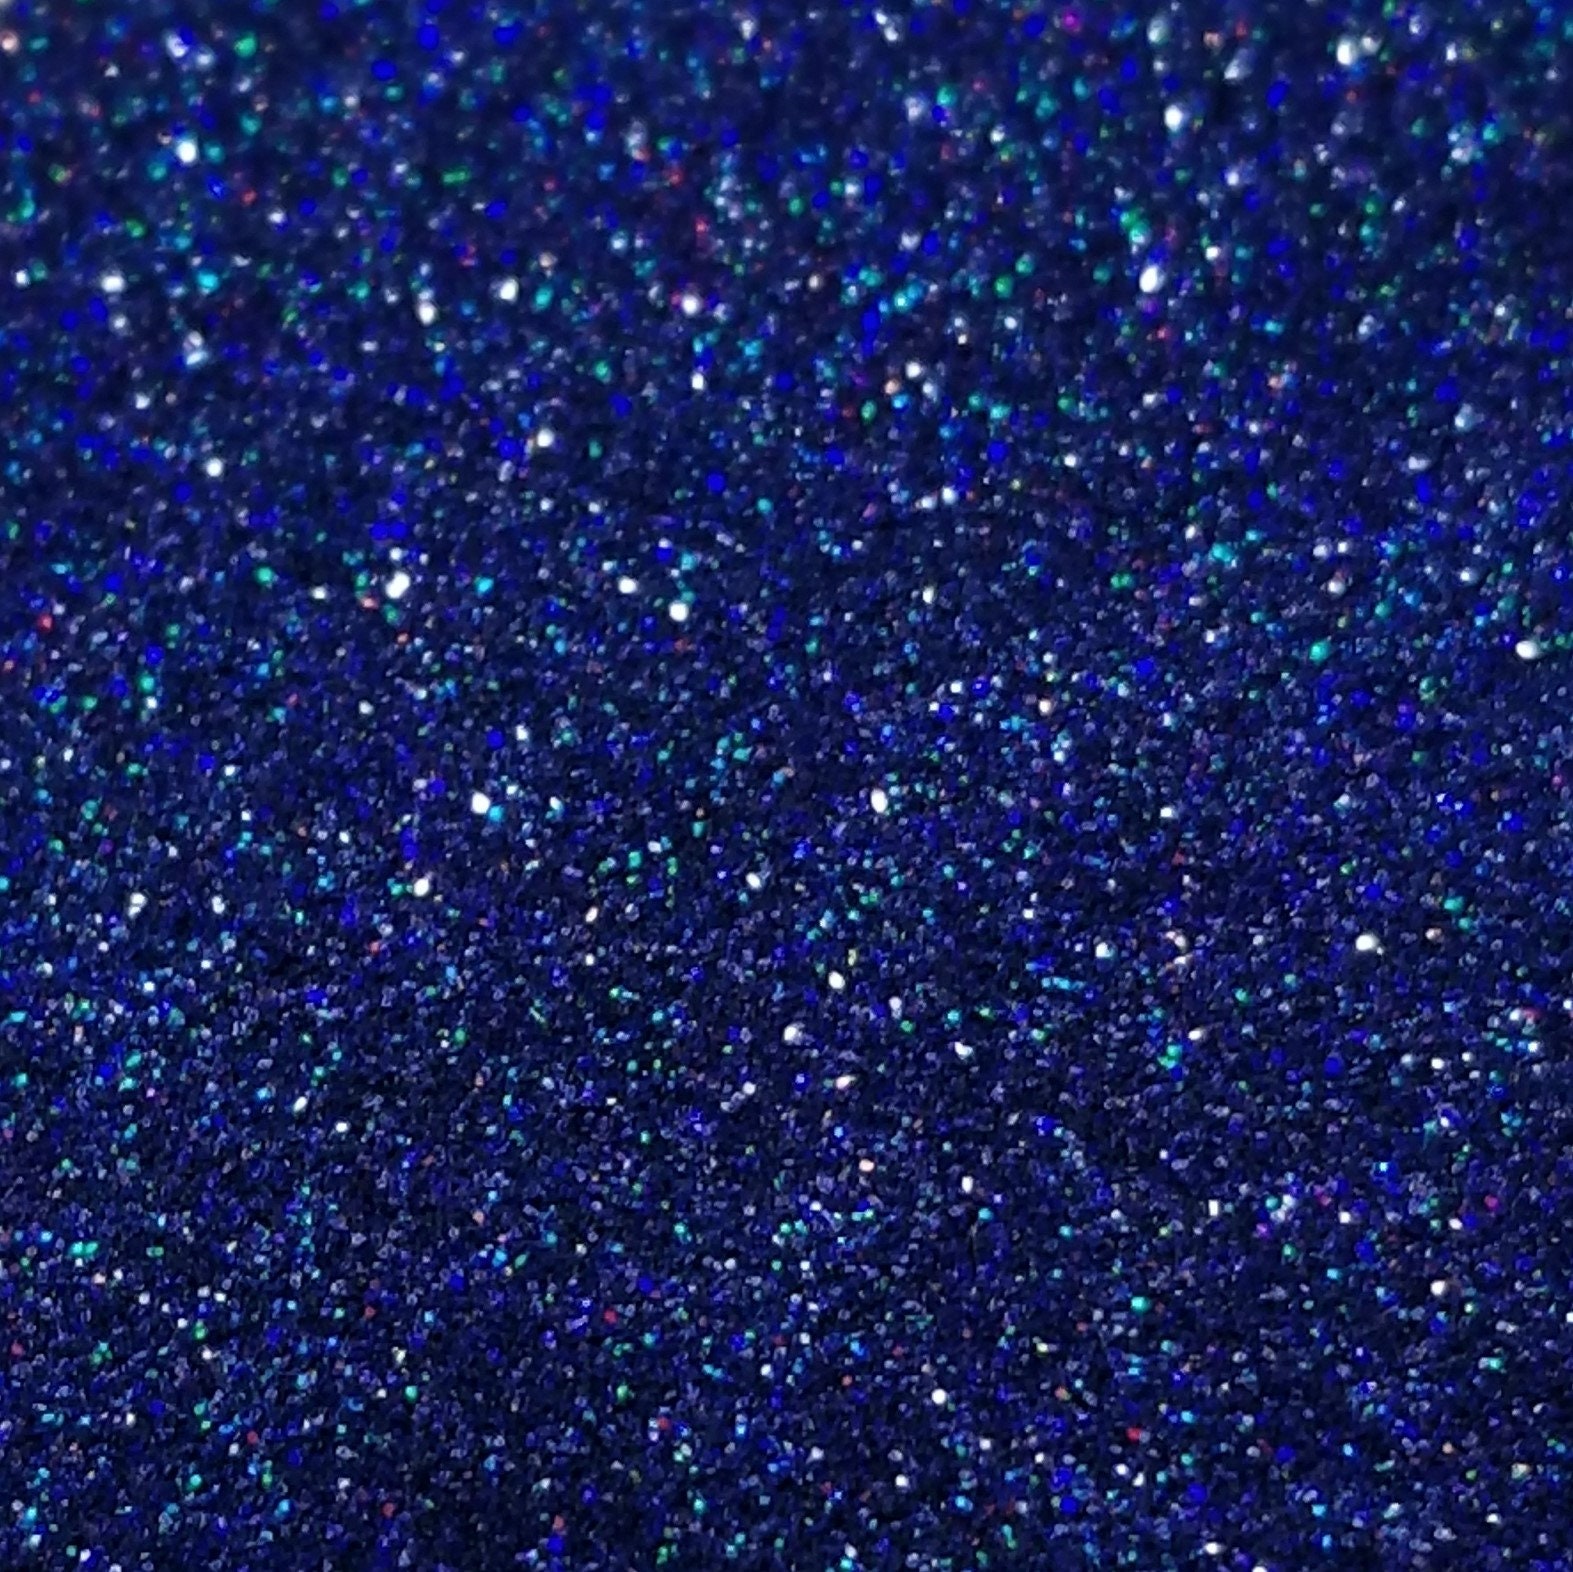 In the Navy Holographic Glitter 